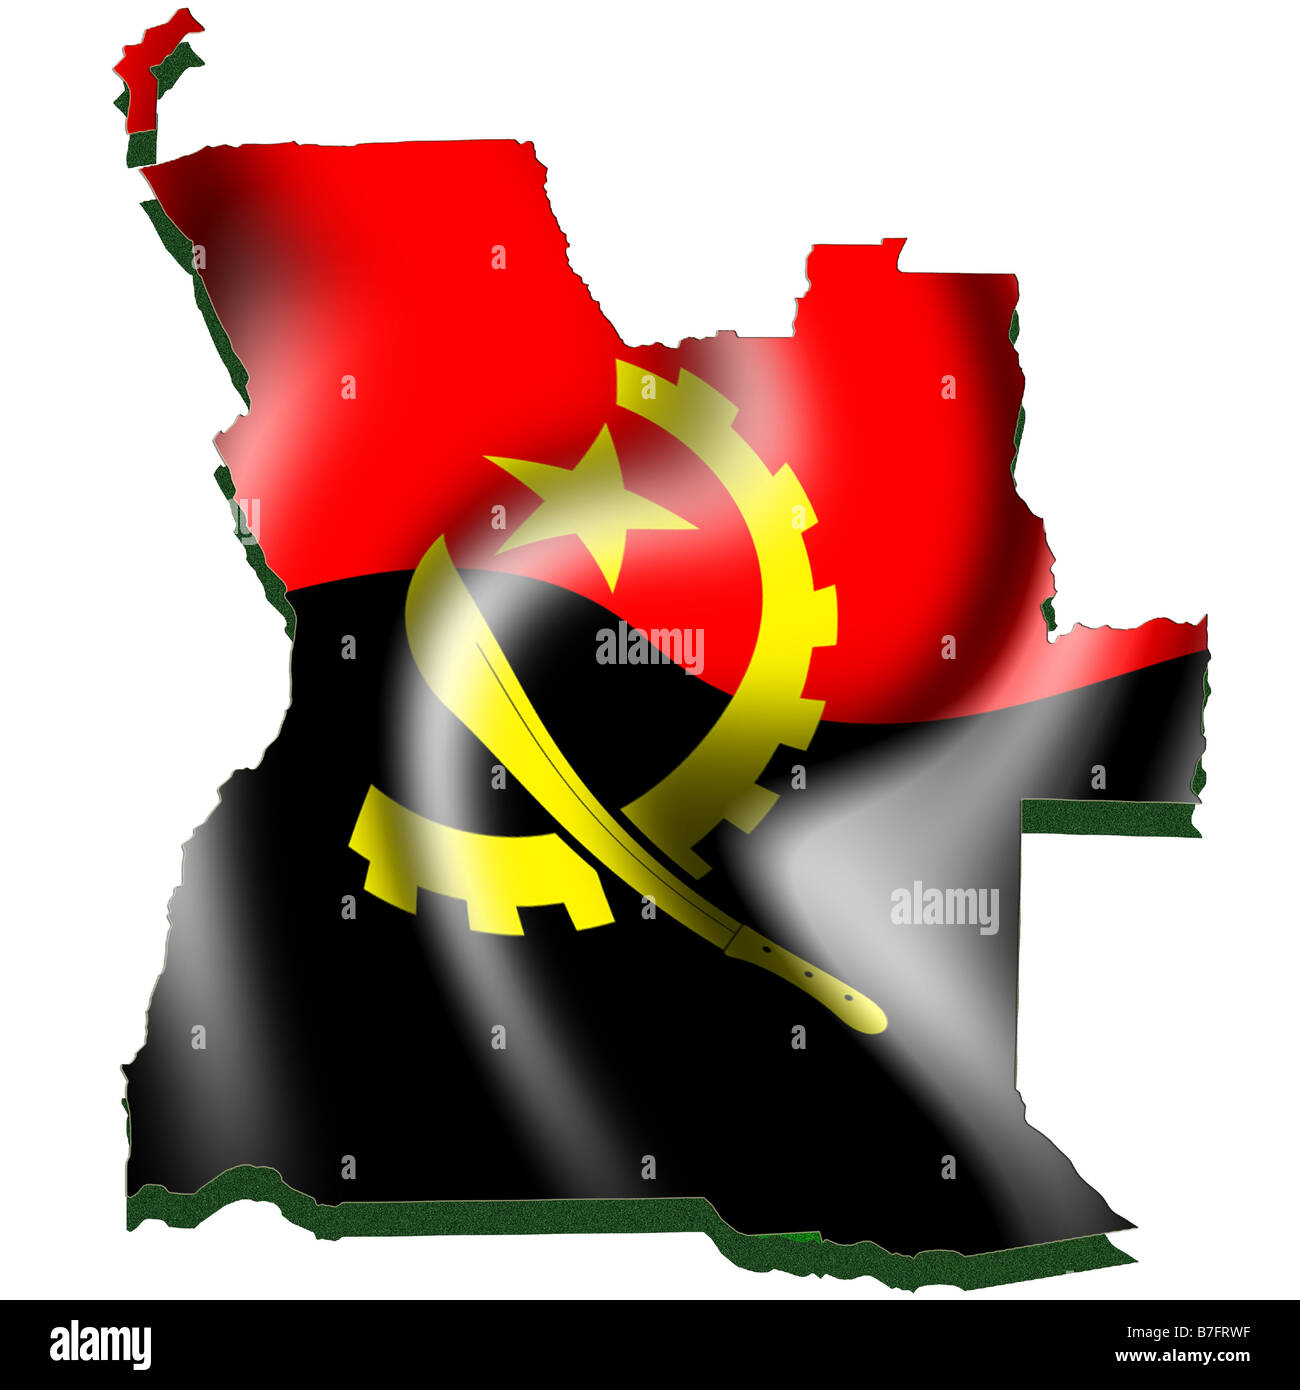 Outline map and flag of Angola Stock Photo